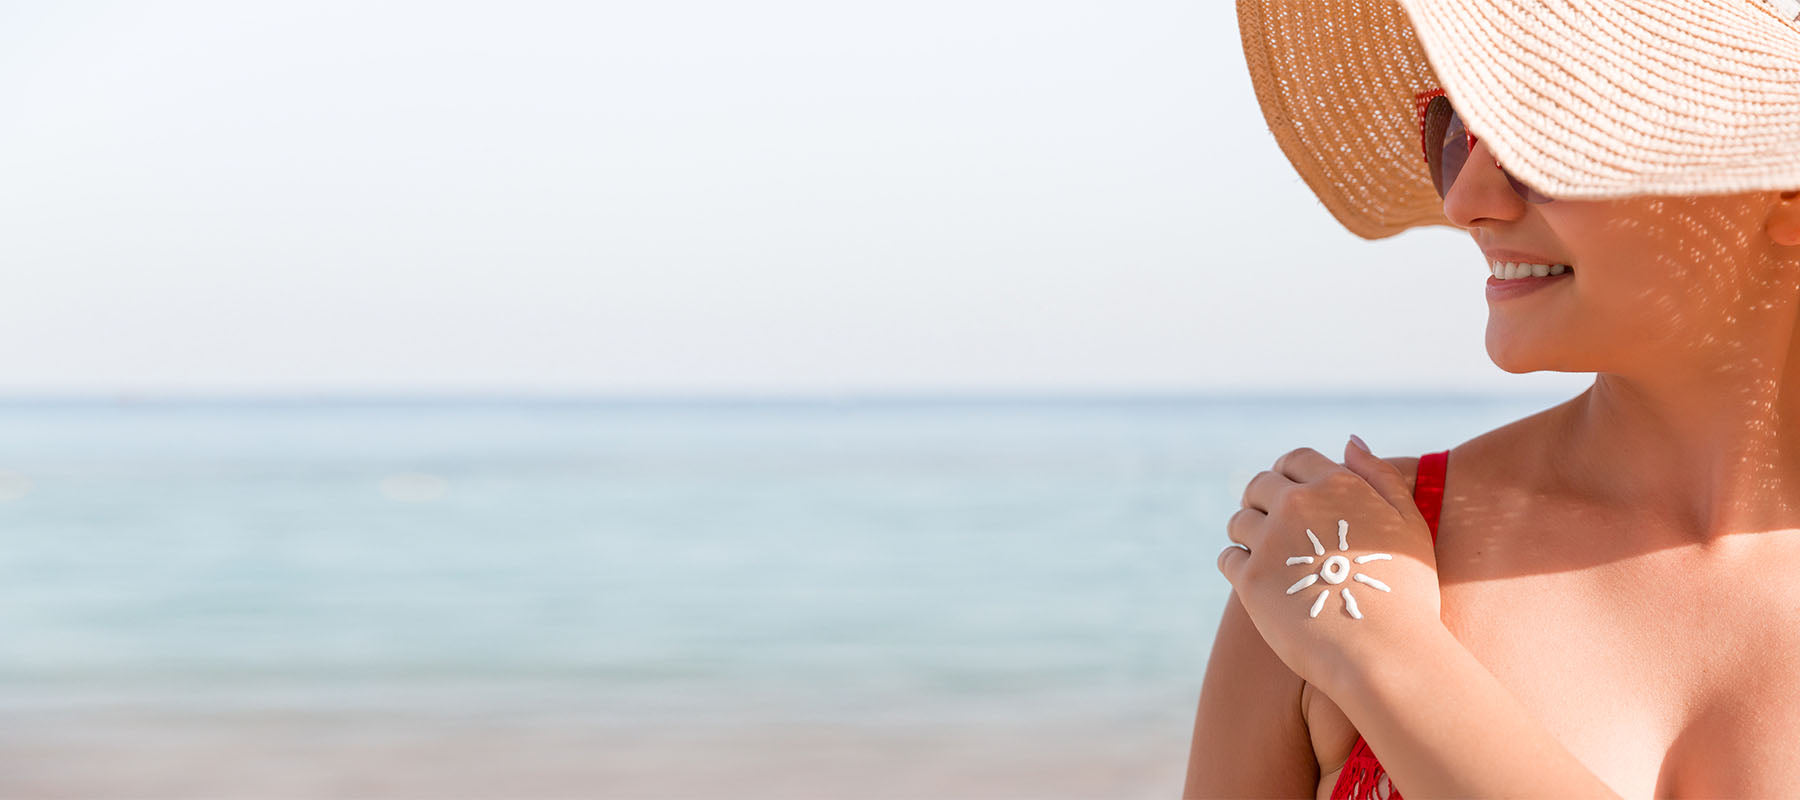 The Lifesaver in a Bottle - Empowering Your Skin with Sun Protection